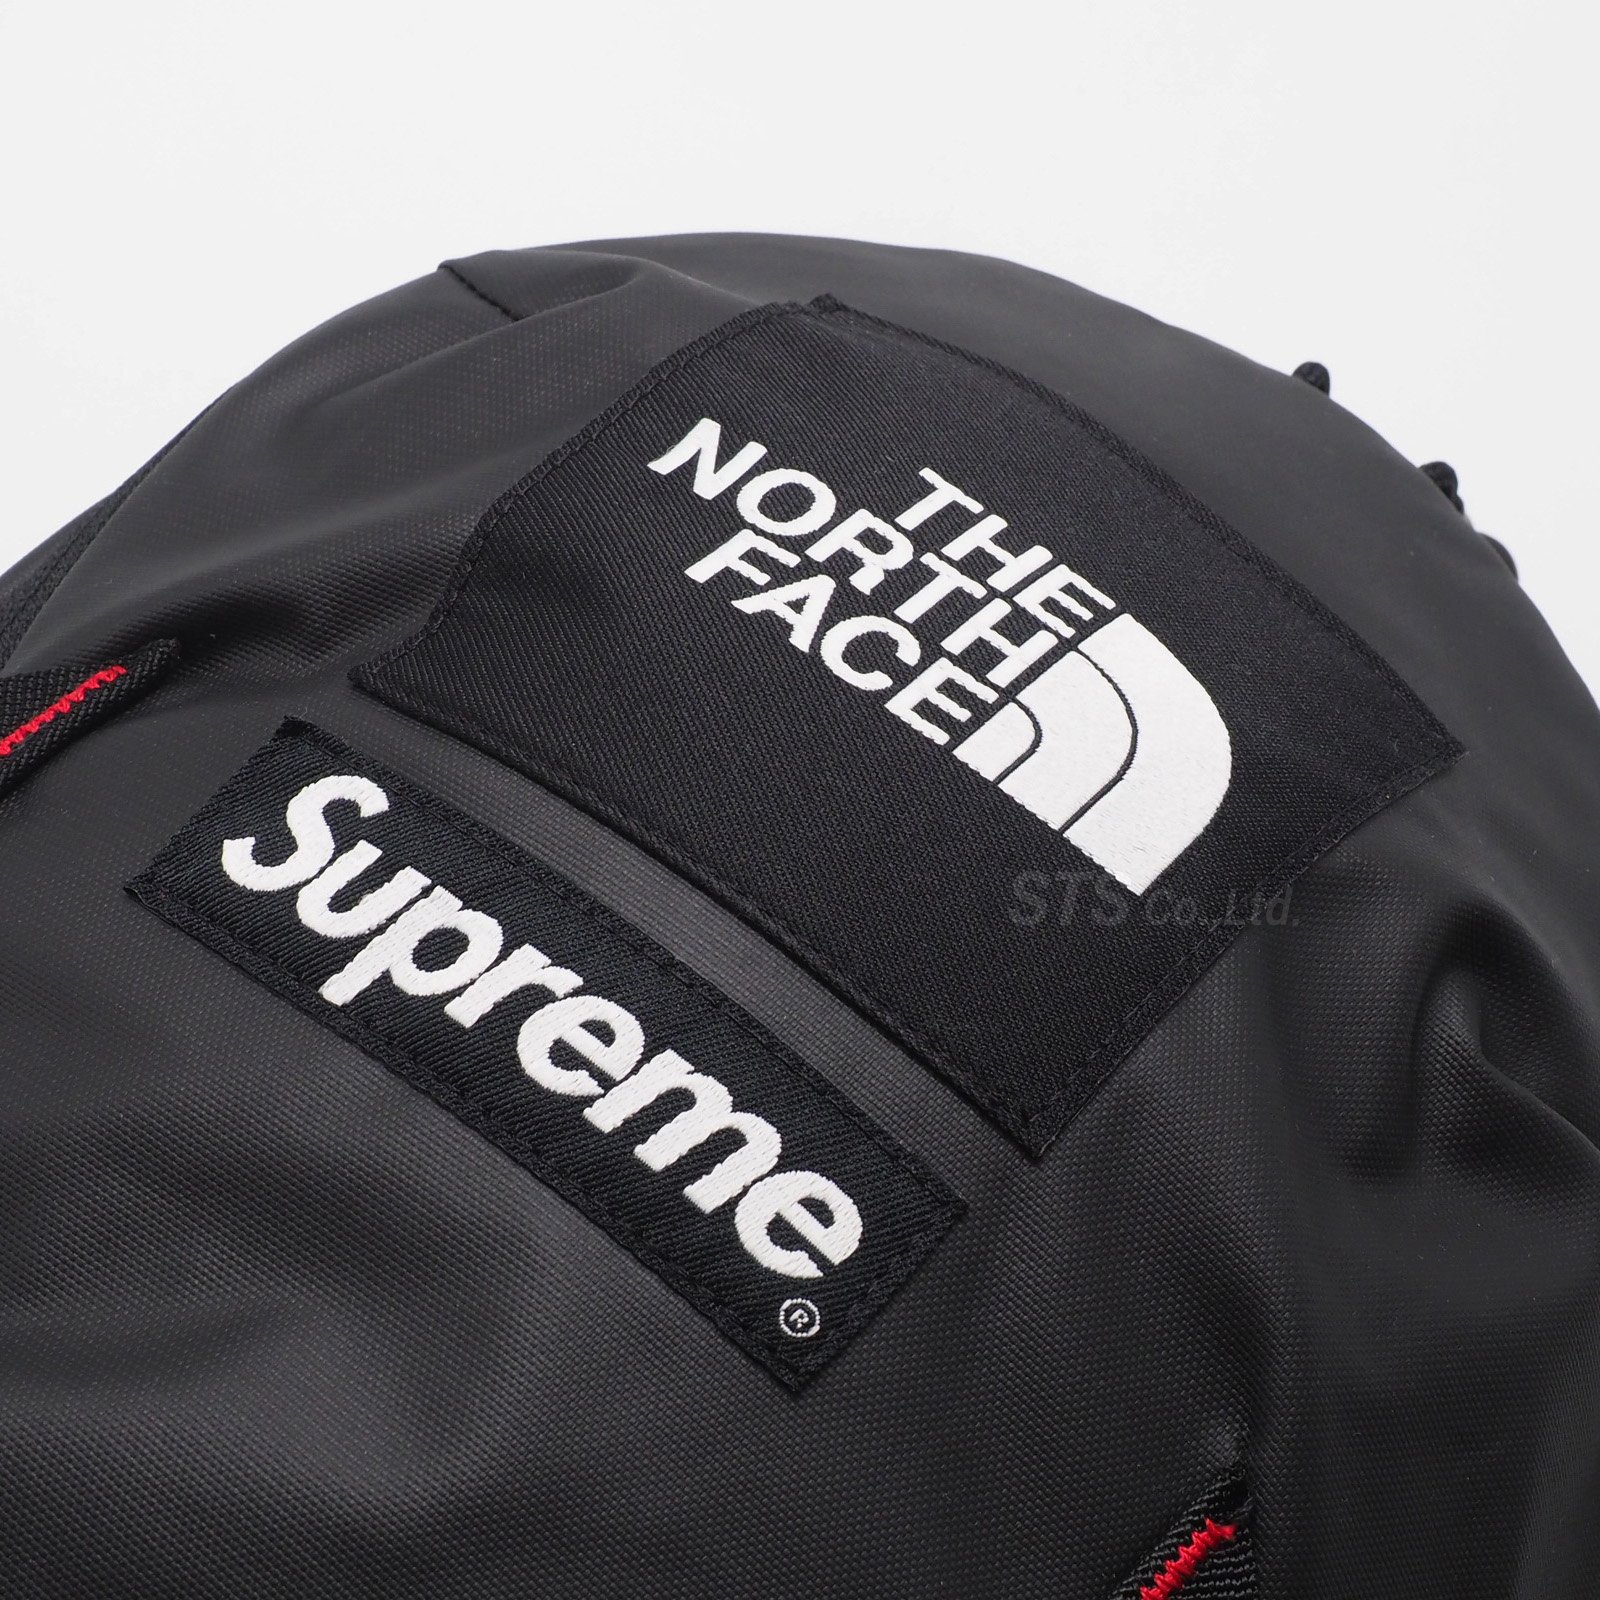 Supreme/The North Face Summit Series Outer Tape Seam Route Rocket Backpack  - ParkSIDER